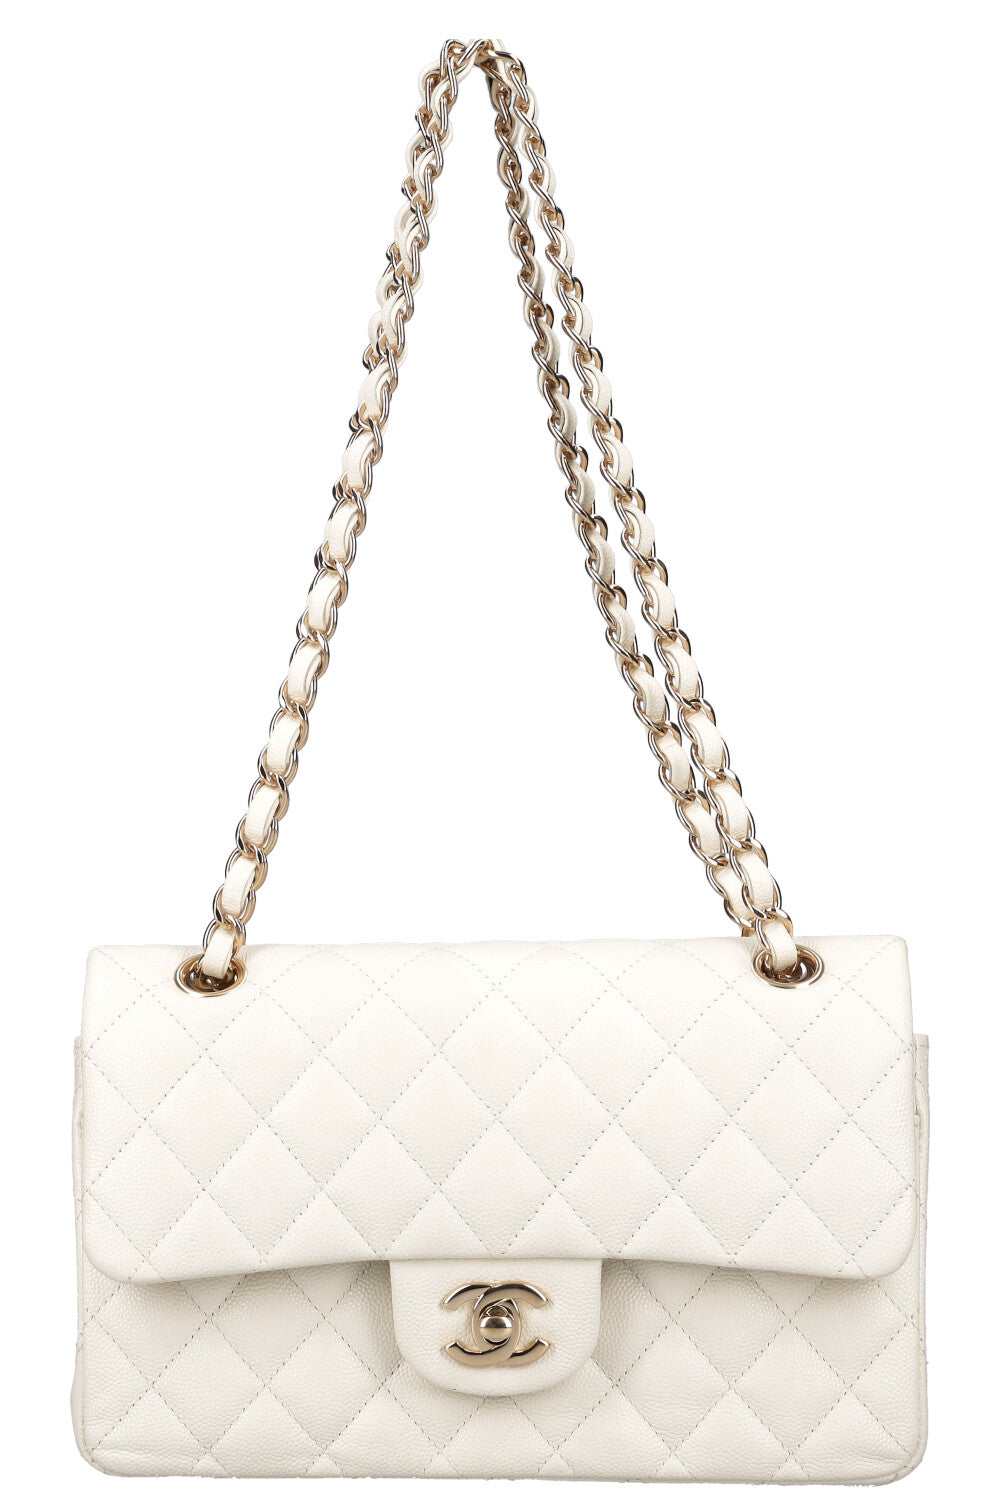 Chanel Double Flap Bag Small Caviar White 2021